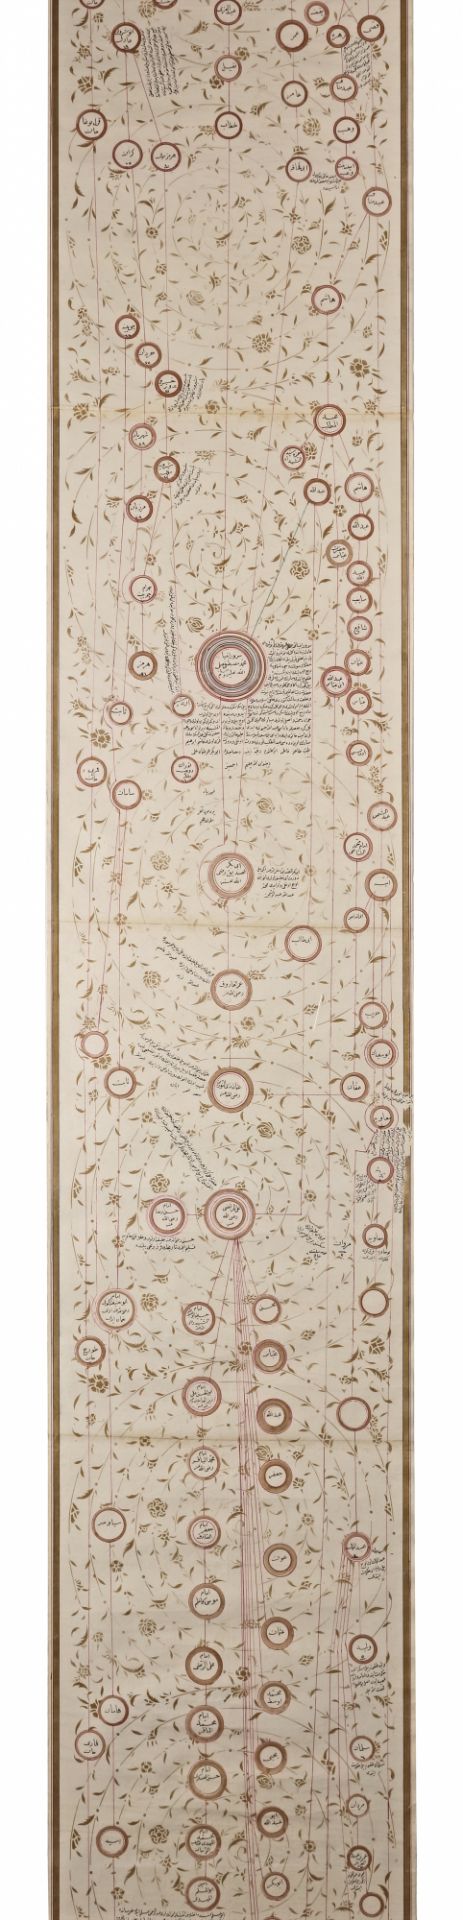 AN ISLAMIC SCROLL ON PAPER, GENEALOGICAL TREE OF THE PROPHET MUHAMMAD, OTTOMAN, 19TH CENTURY - Image 4 of 11